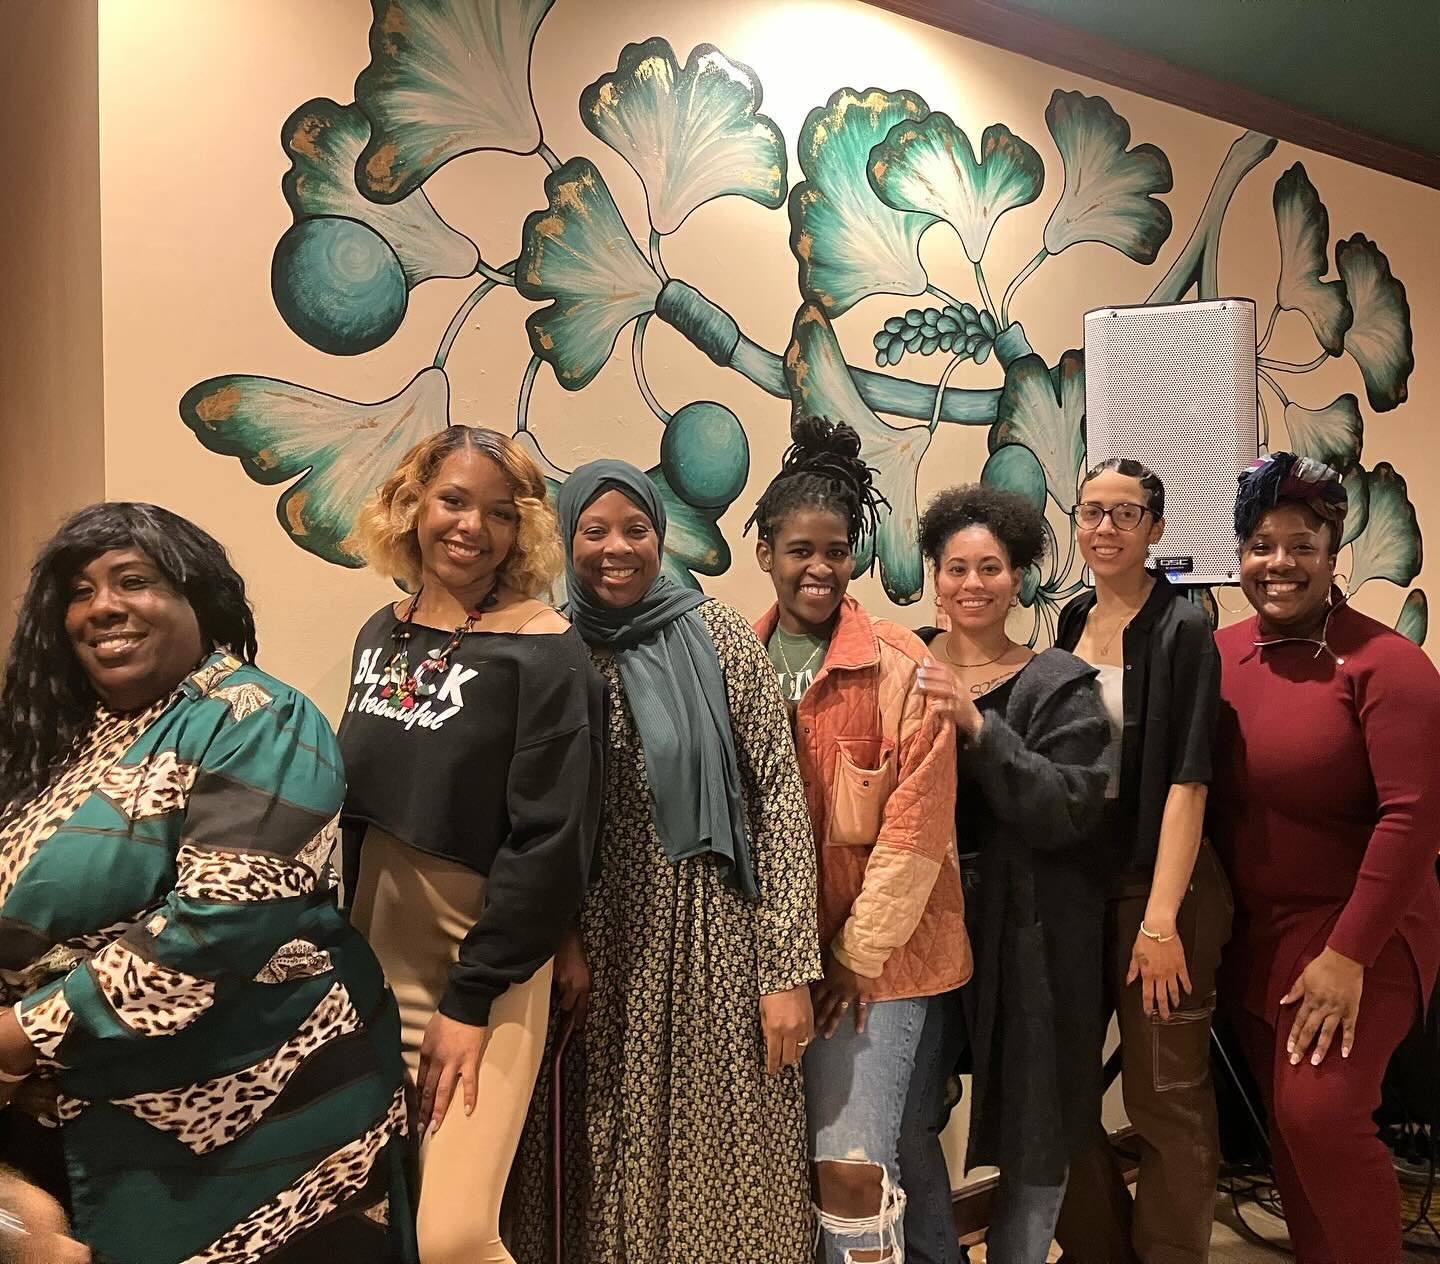 We are so grateful to all of our mamas, fathers, babies, community members and doulas who showed up to party and celebrate at our annual fundraiser. Today during Black Maternal Health Week, we are still uplifting Black Mamas, Families, Midwives and D